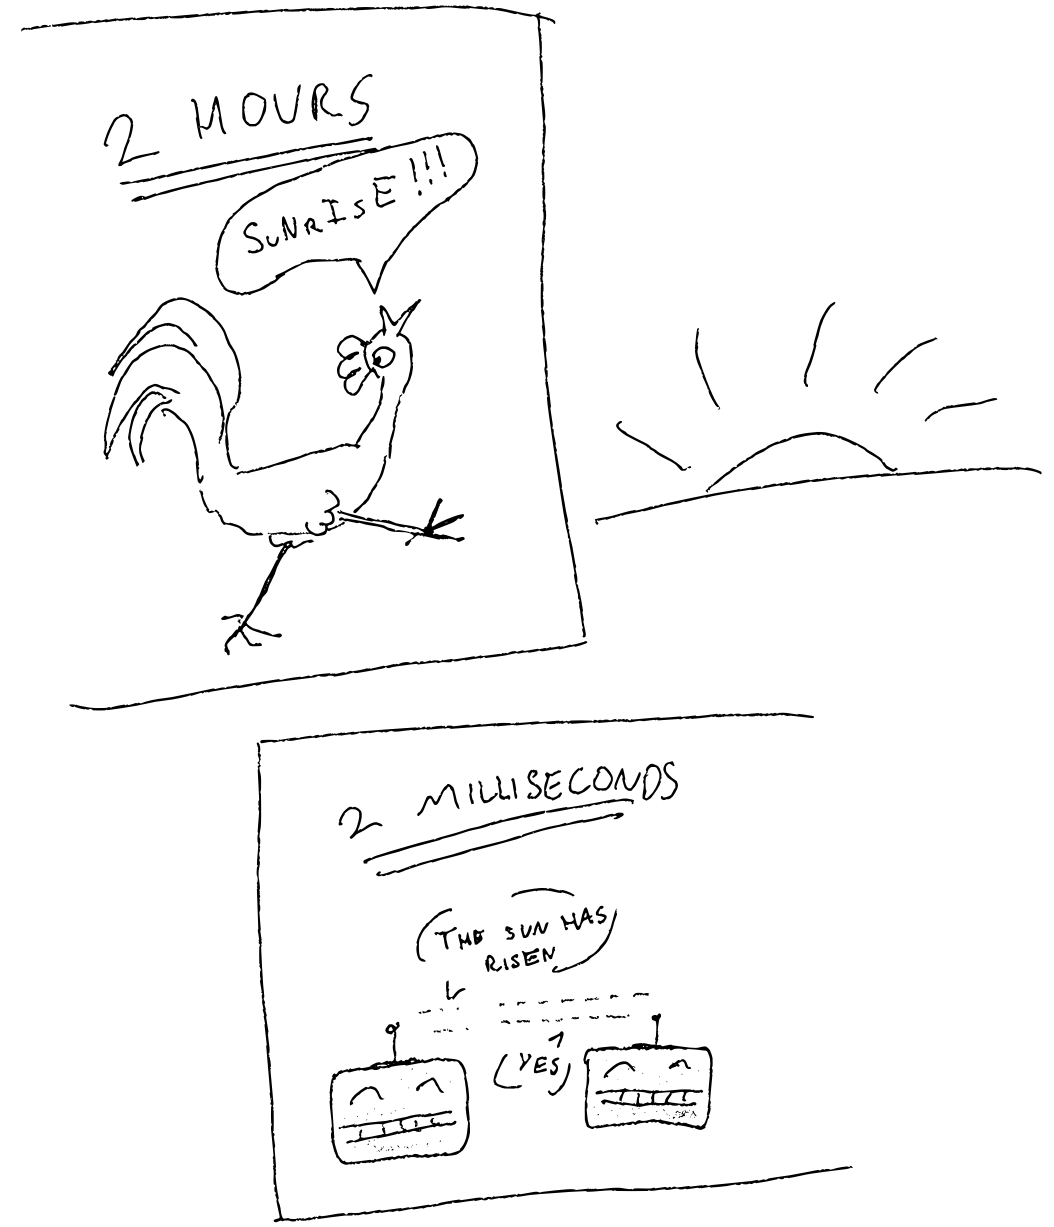  Runtime flapping: The sun is starting to rise. A cockerel struts wildly for 2 hours, yelling "SuNrIsE!!!" while two placid robots communicate via antennae "The sun has risen" "Yes" in 2 milliseconds 